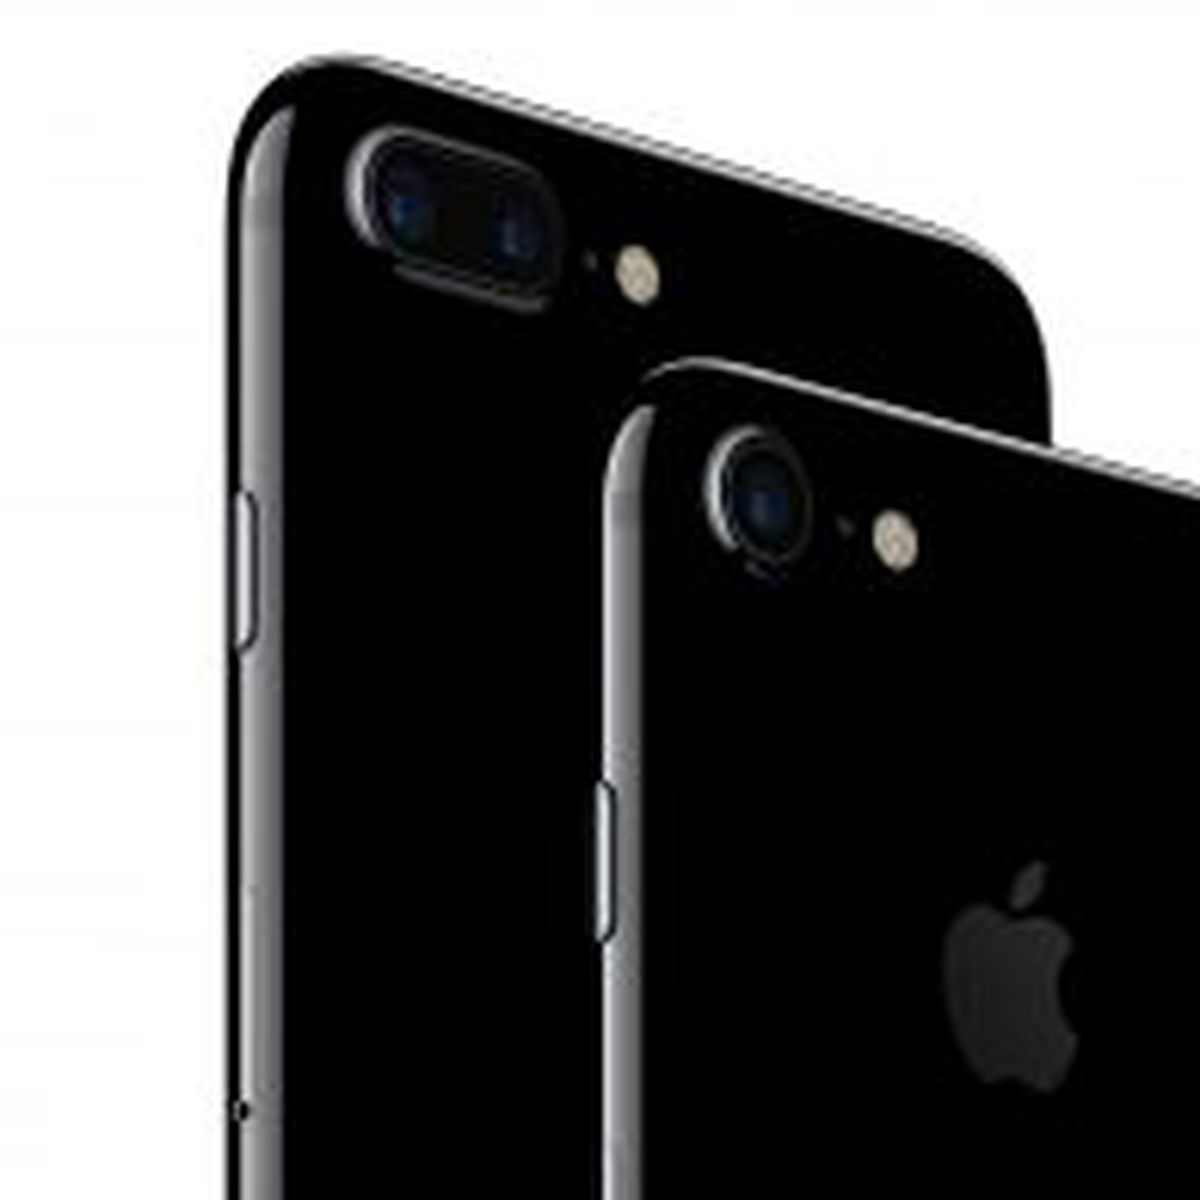 32GB Storage Option Now Available for iPhone 7 in Jet Black Color